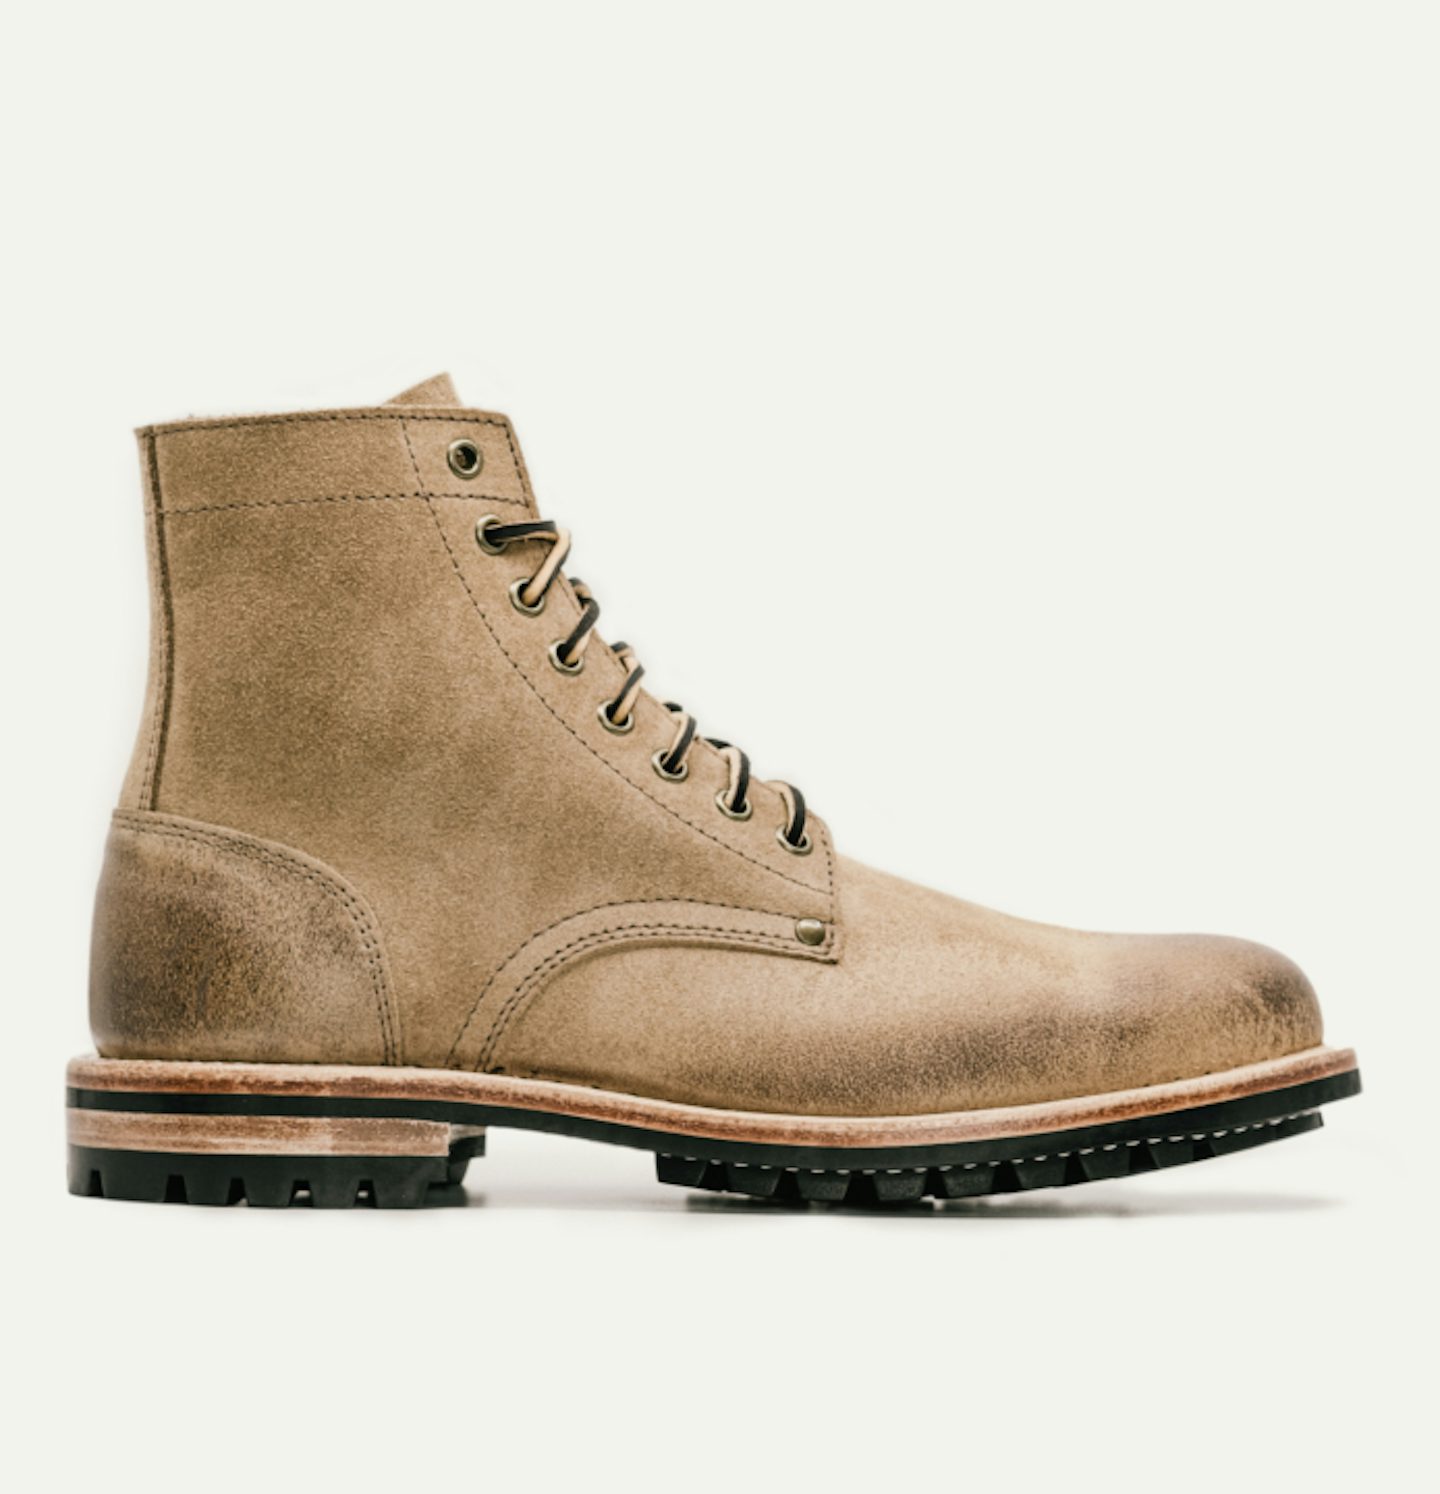 Type-10 Trench Boot - Natural Chromexcel Roughout